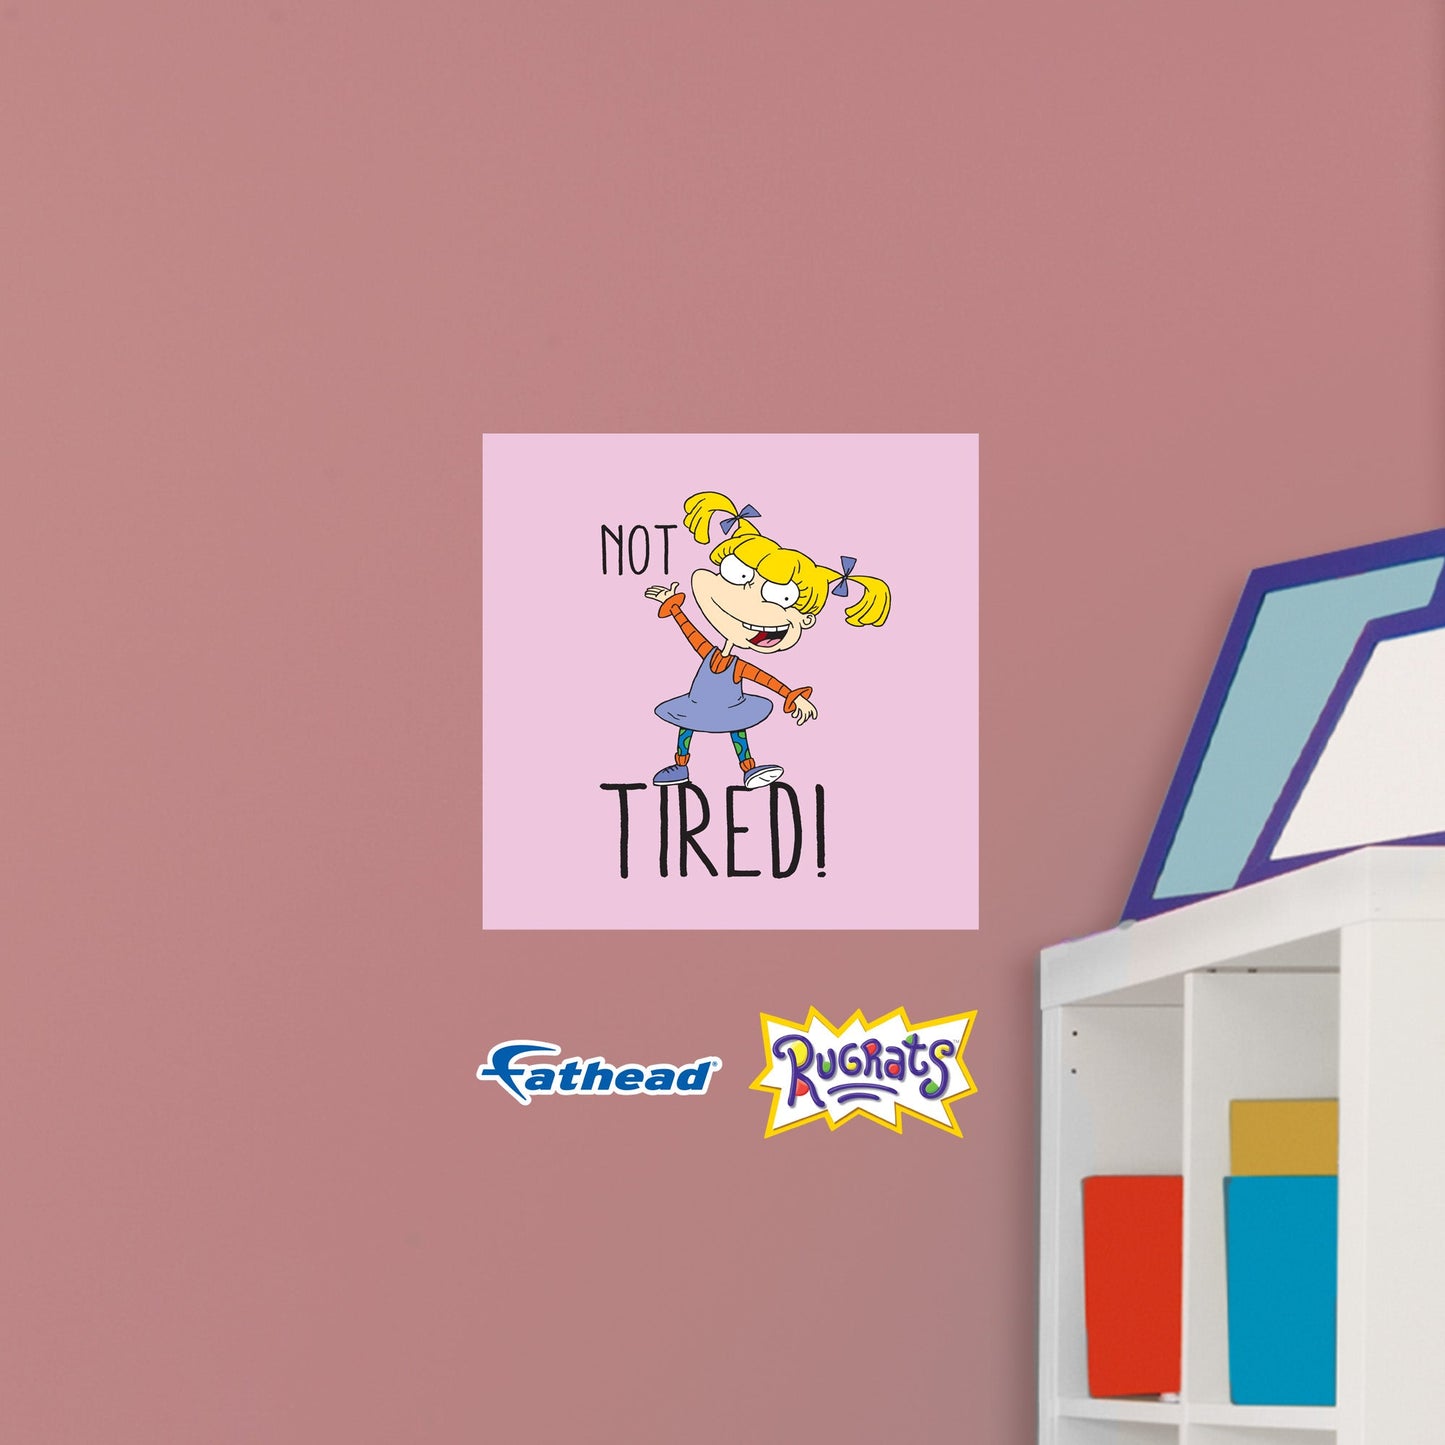 Rugrats: Not Tired Poster - Officially Licensed Nickelodeon Removable Adhesive Decal